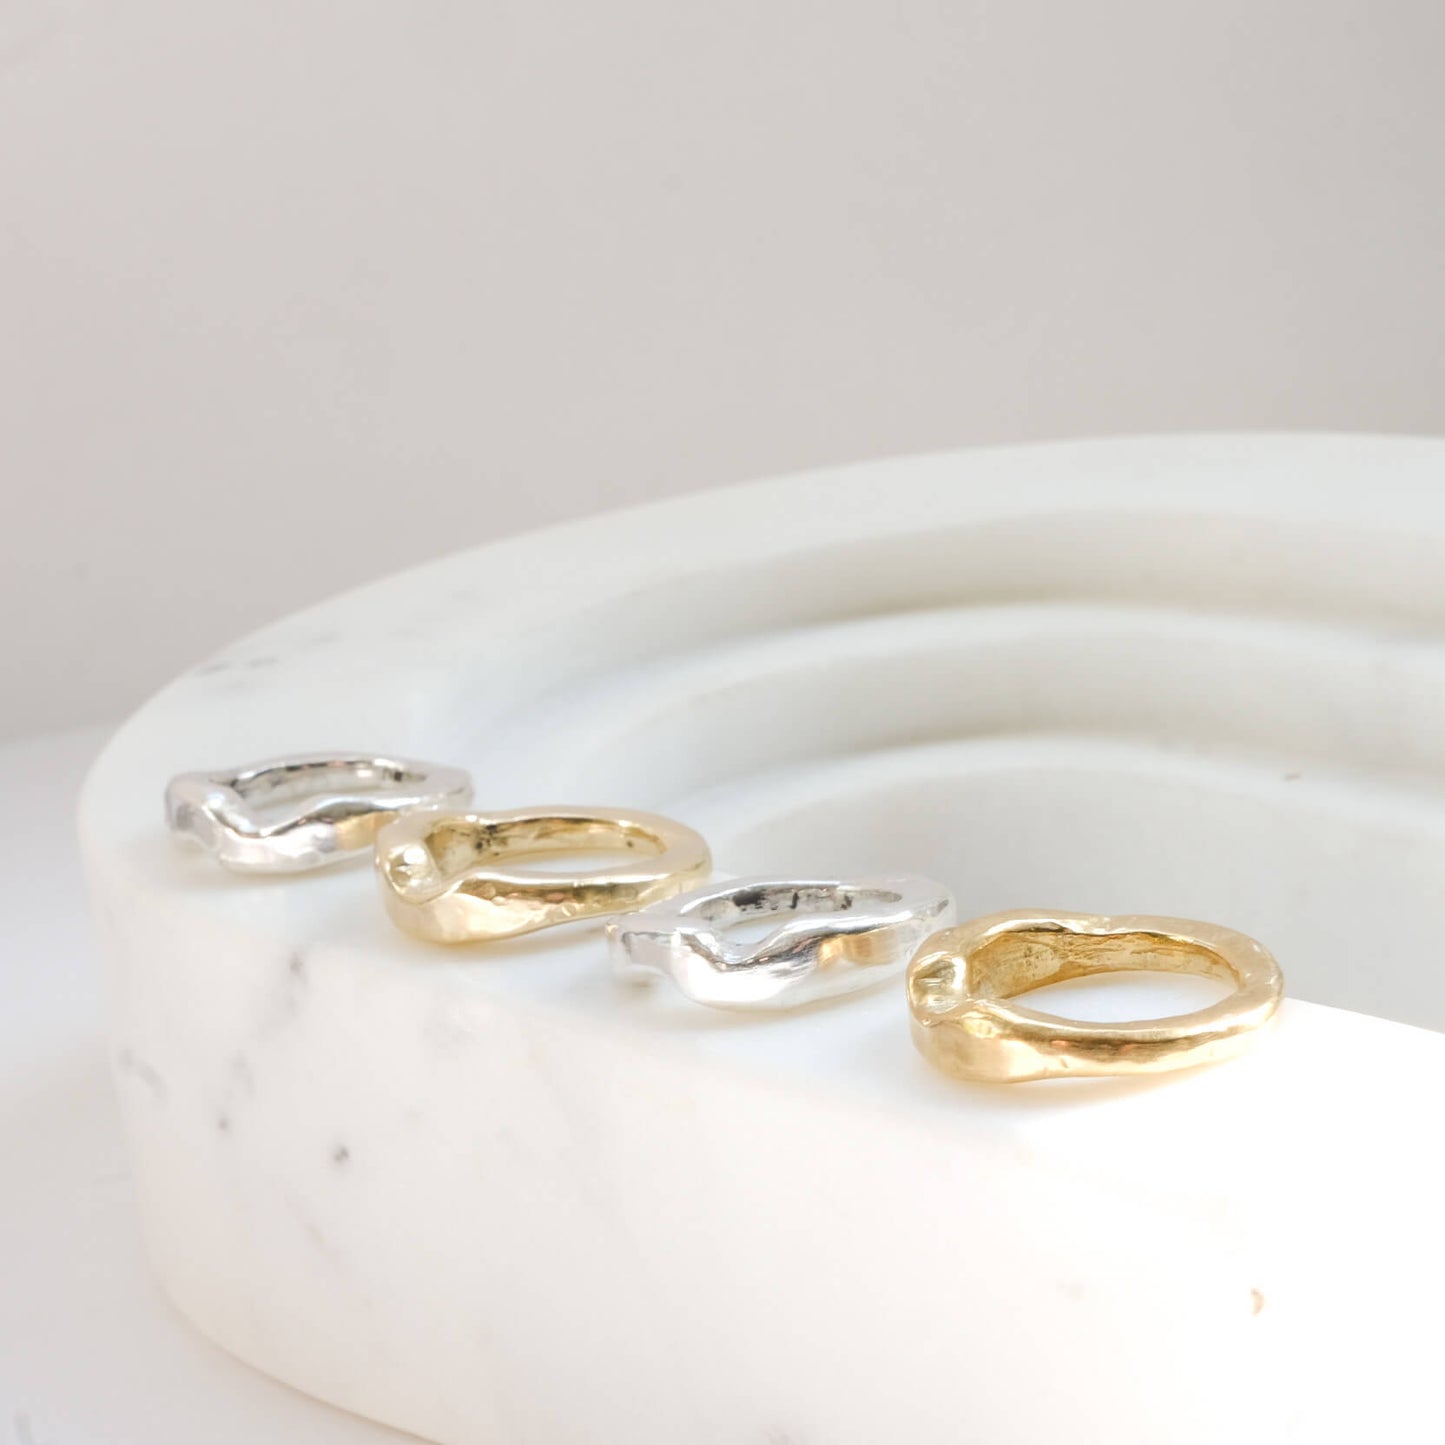 Sculpted Arch Solid Ring - Brass & Sterling Silver